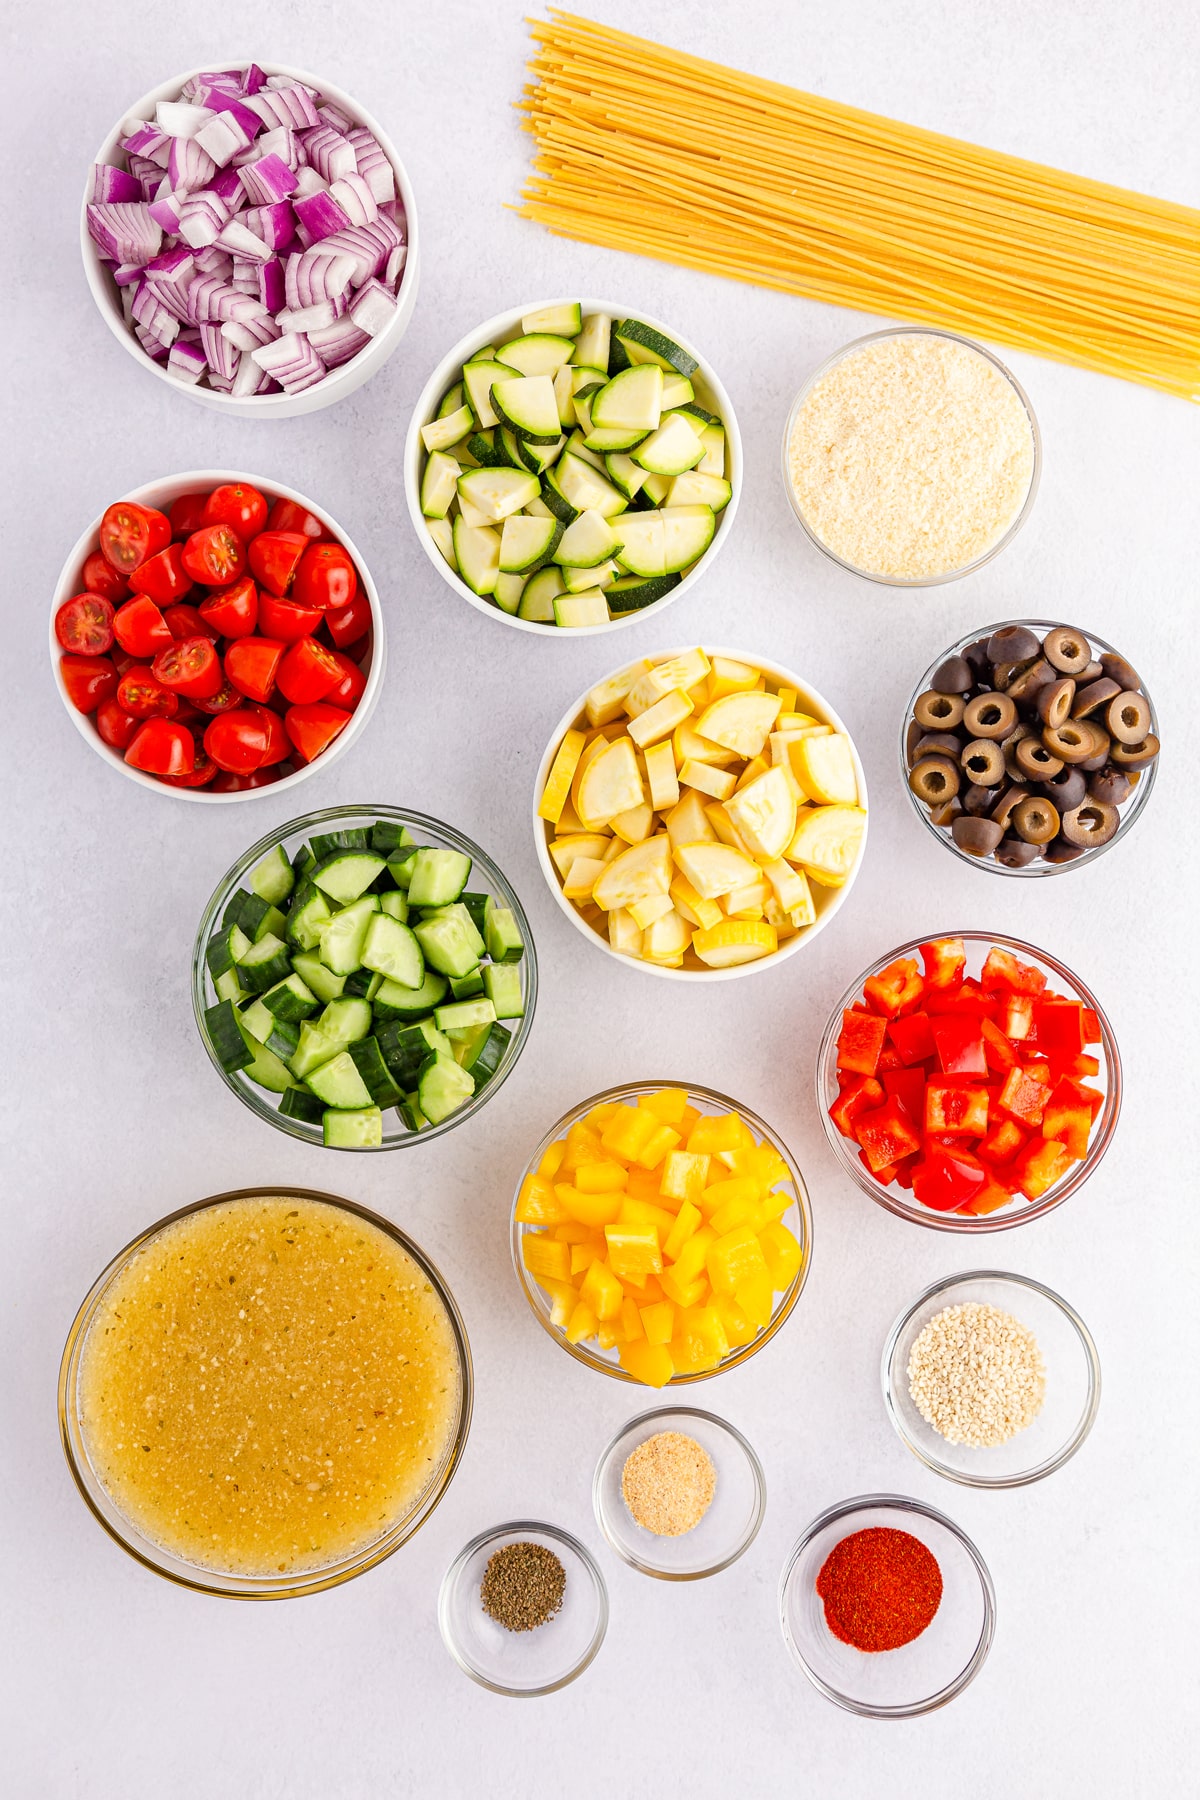 Ingredients for California Spaghetti Salad include spaghetti, cherry or grape tomatoes, English cucumber, red bell pepper, yellow bell pepper, red onion, black olives, yellow squash diced, and Zucchini. For the dressing, it include Italian salad dressing, grated parmesan cheese, sesame seeds, paprika, garlic powder, celery seeds